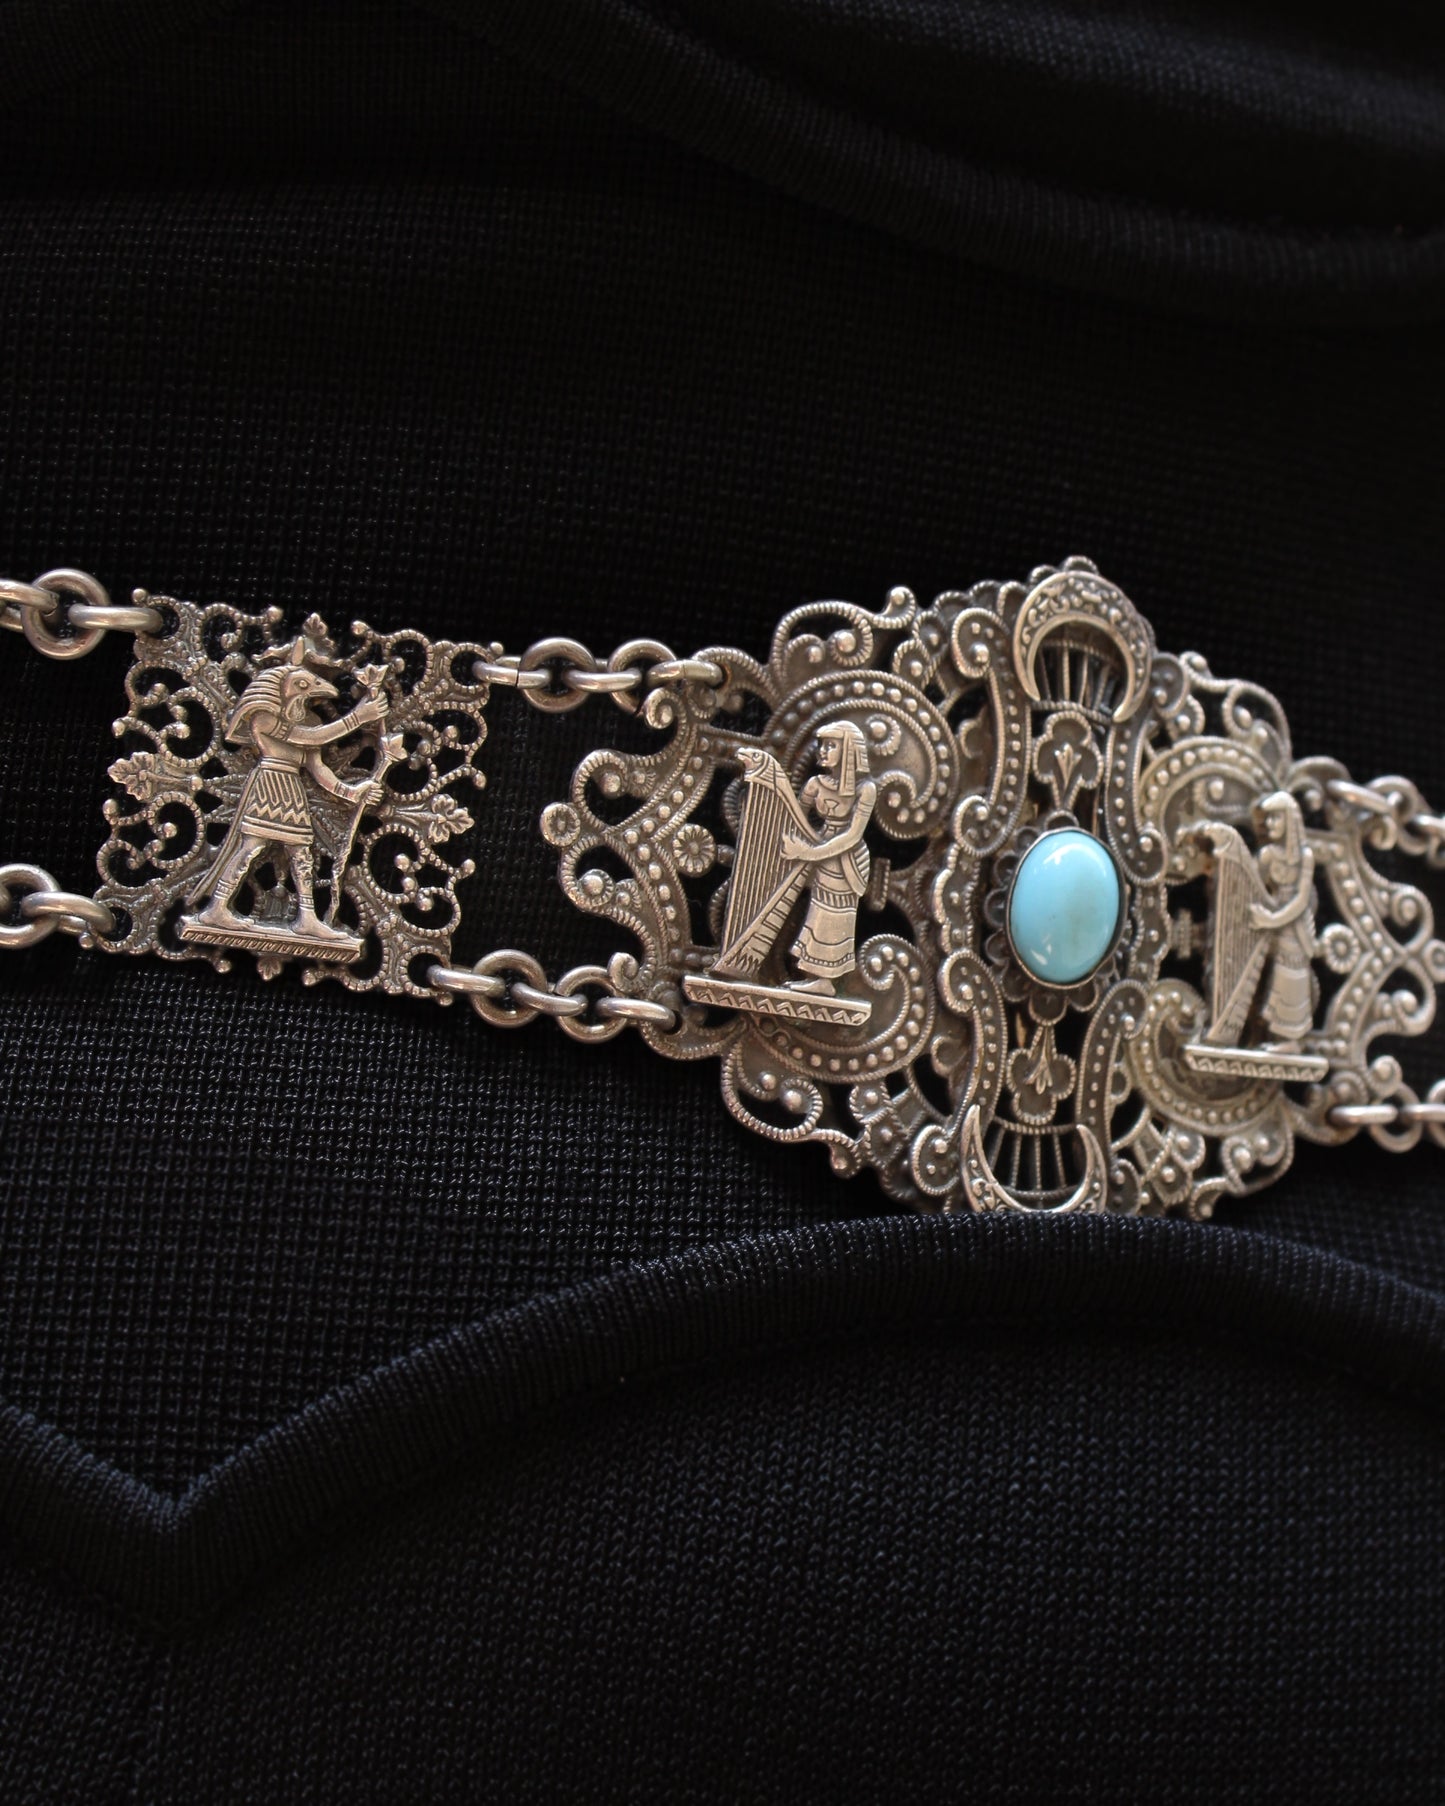 ANTIQUE 19th CENTURY EGYPTIAN REVIVAL SILVER BELT